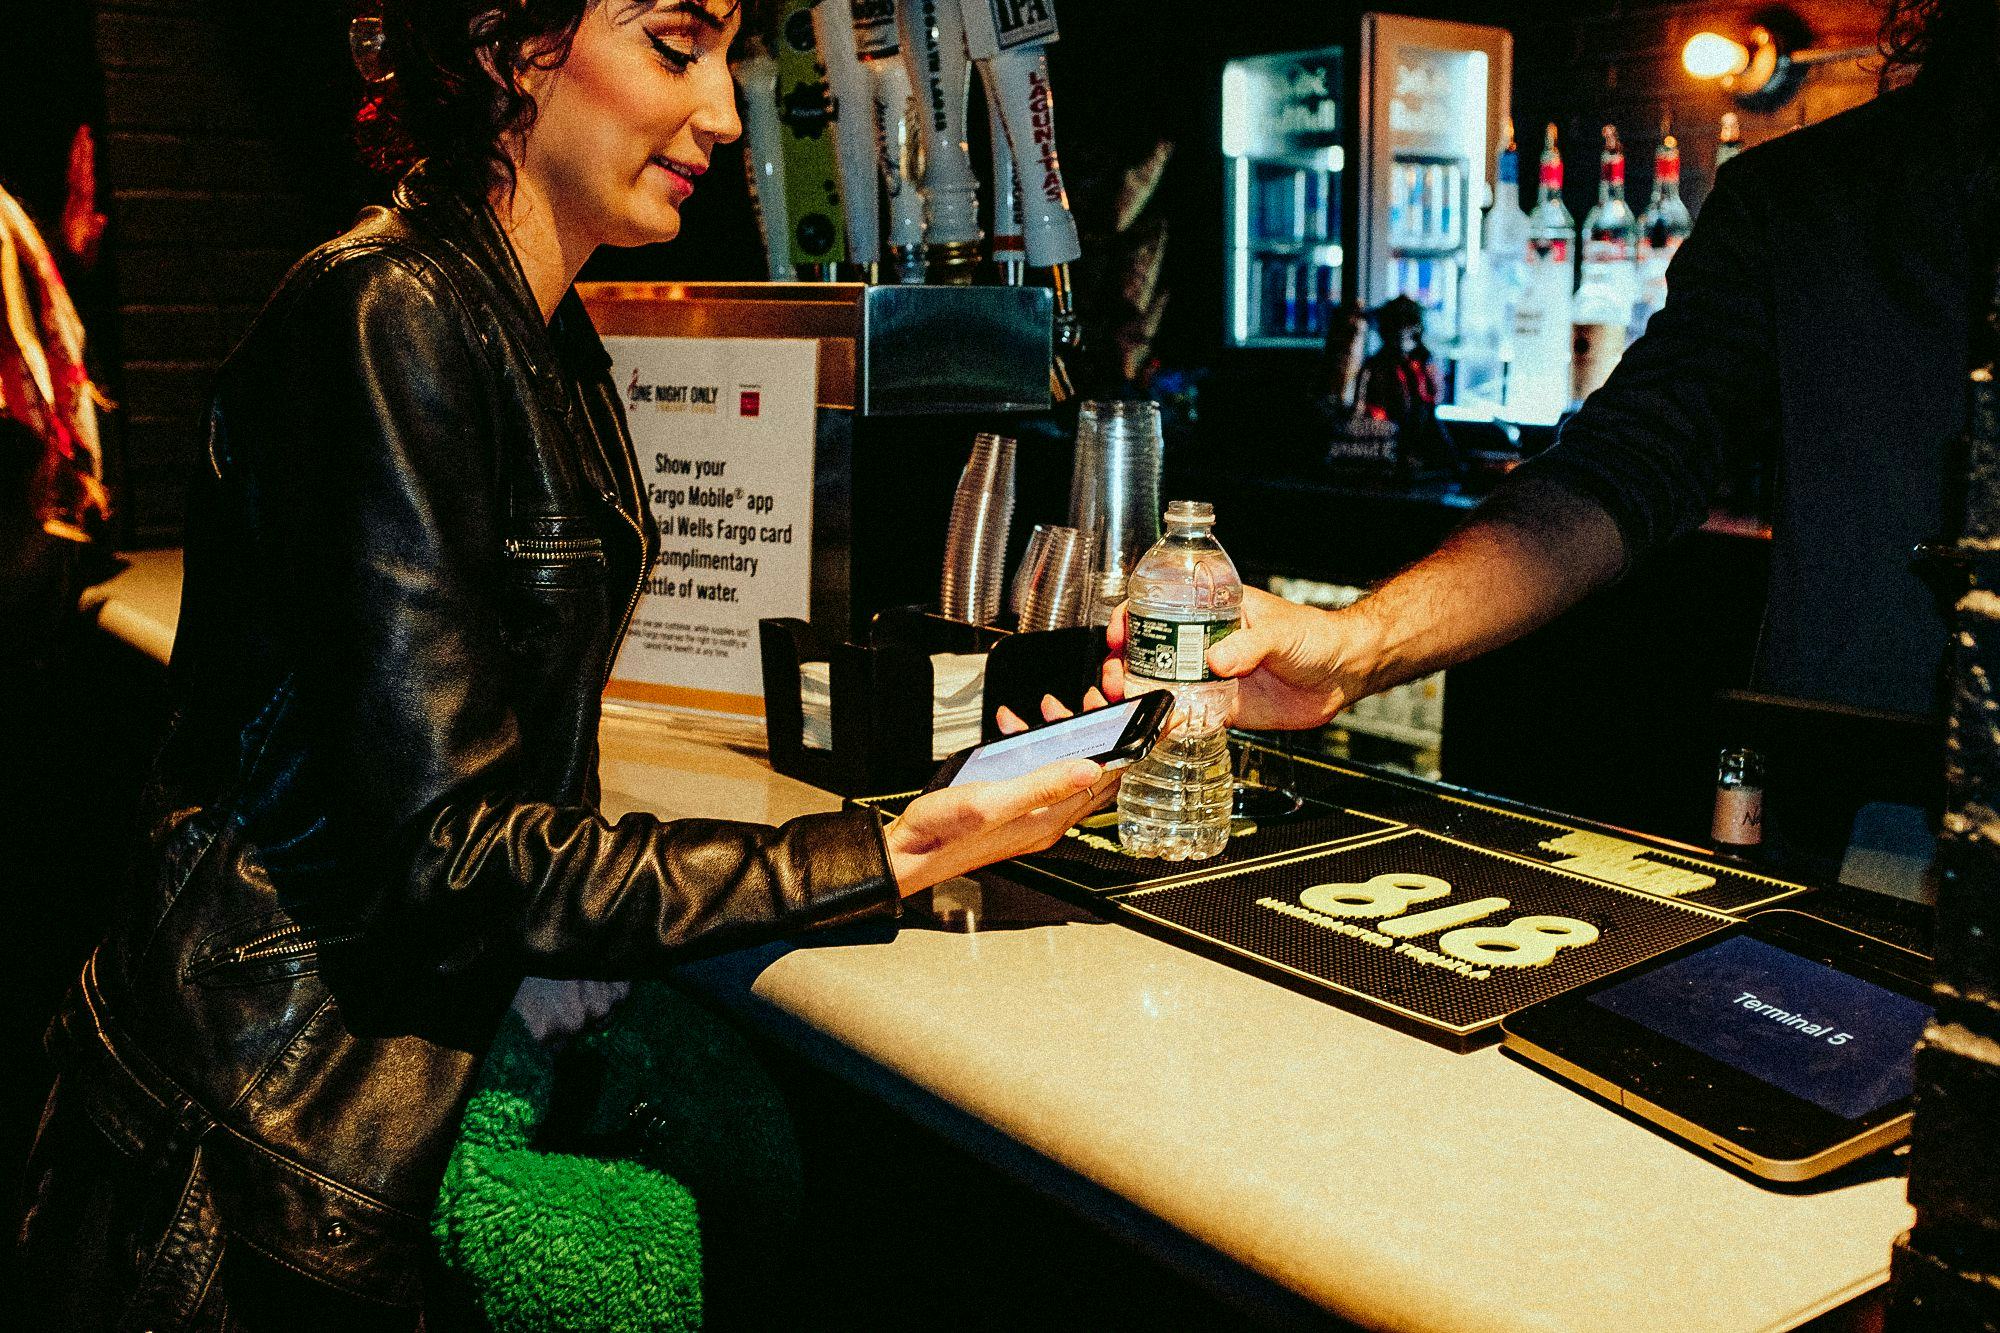 woman showing smart phone to bartender to receive a free bottle water